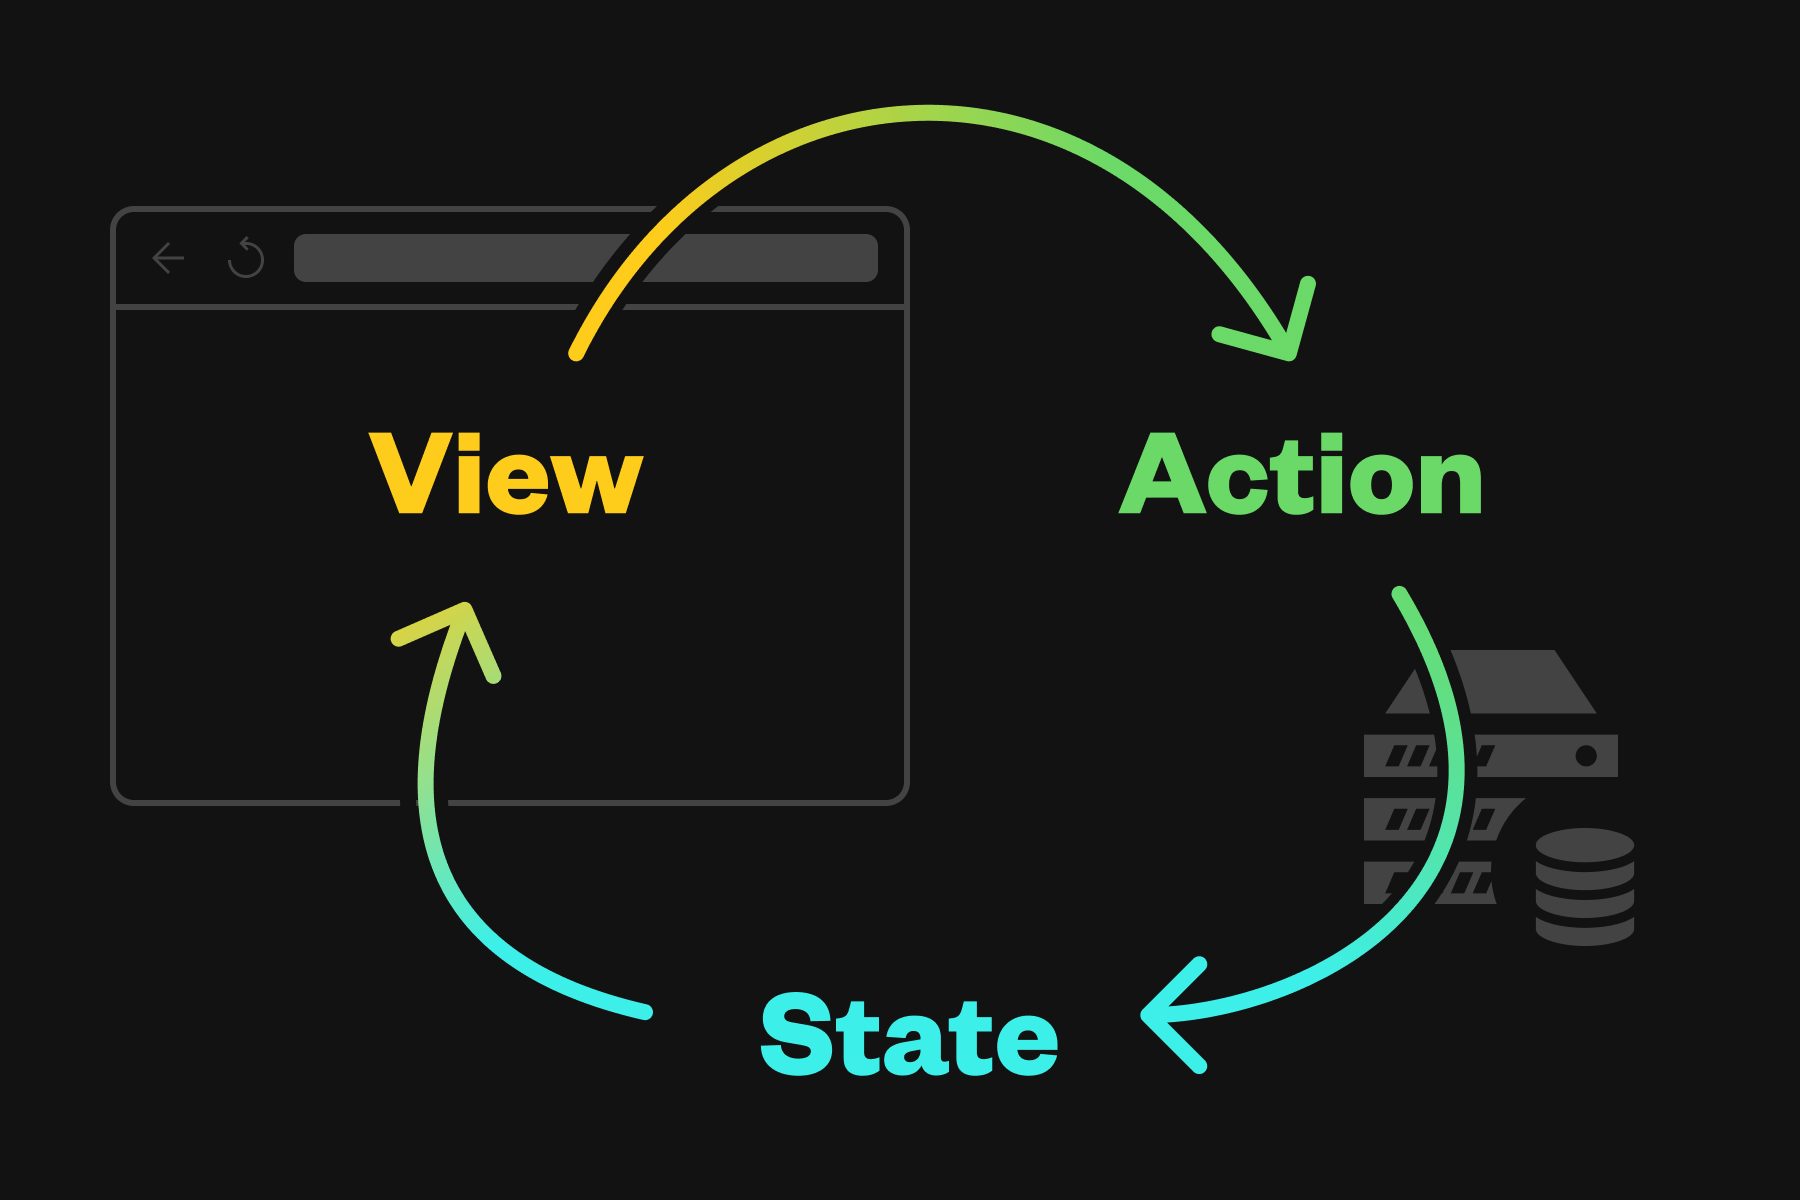 Illustration of the flow “View -> Action -> State” crossing between the browser and the server.